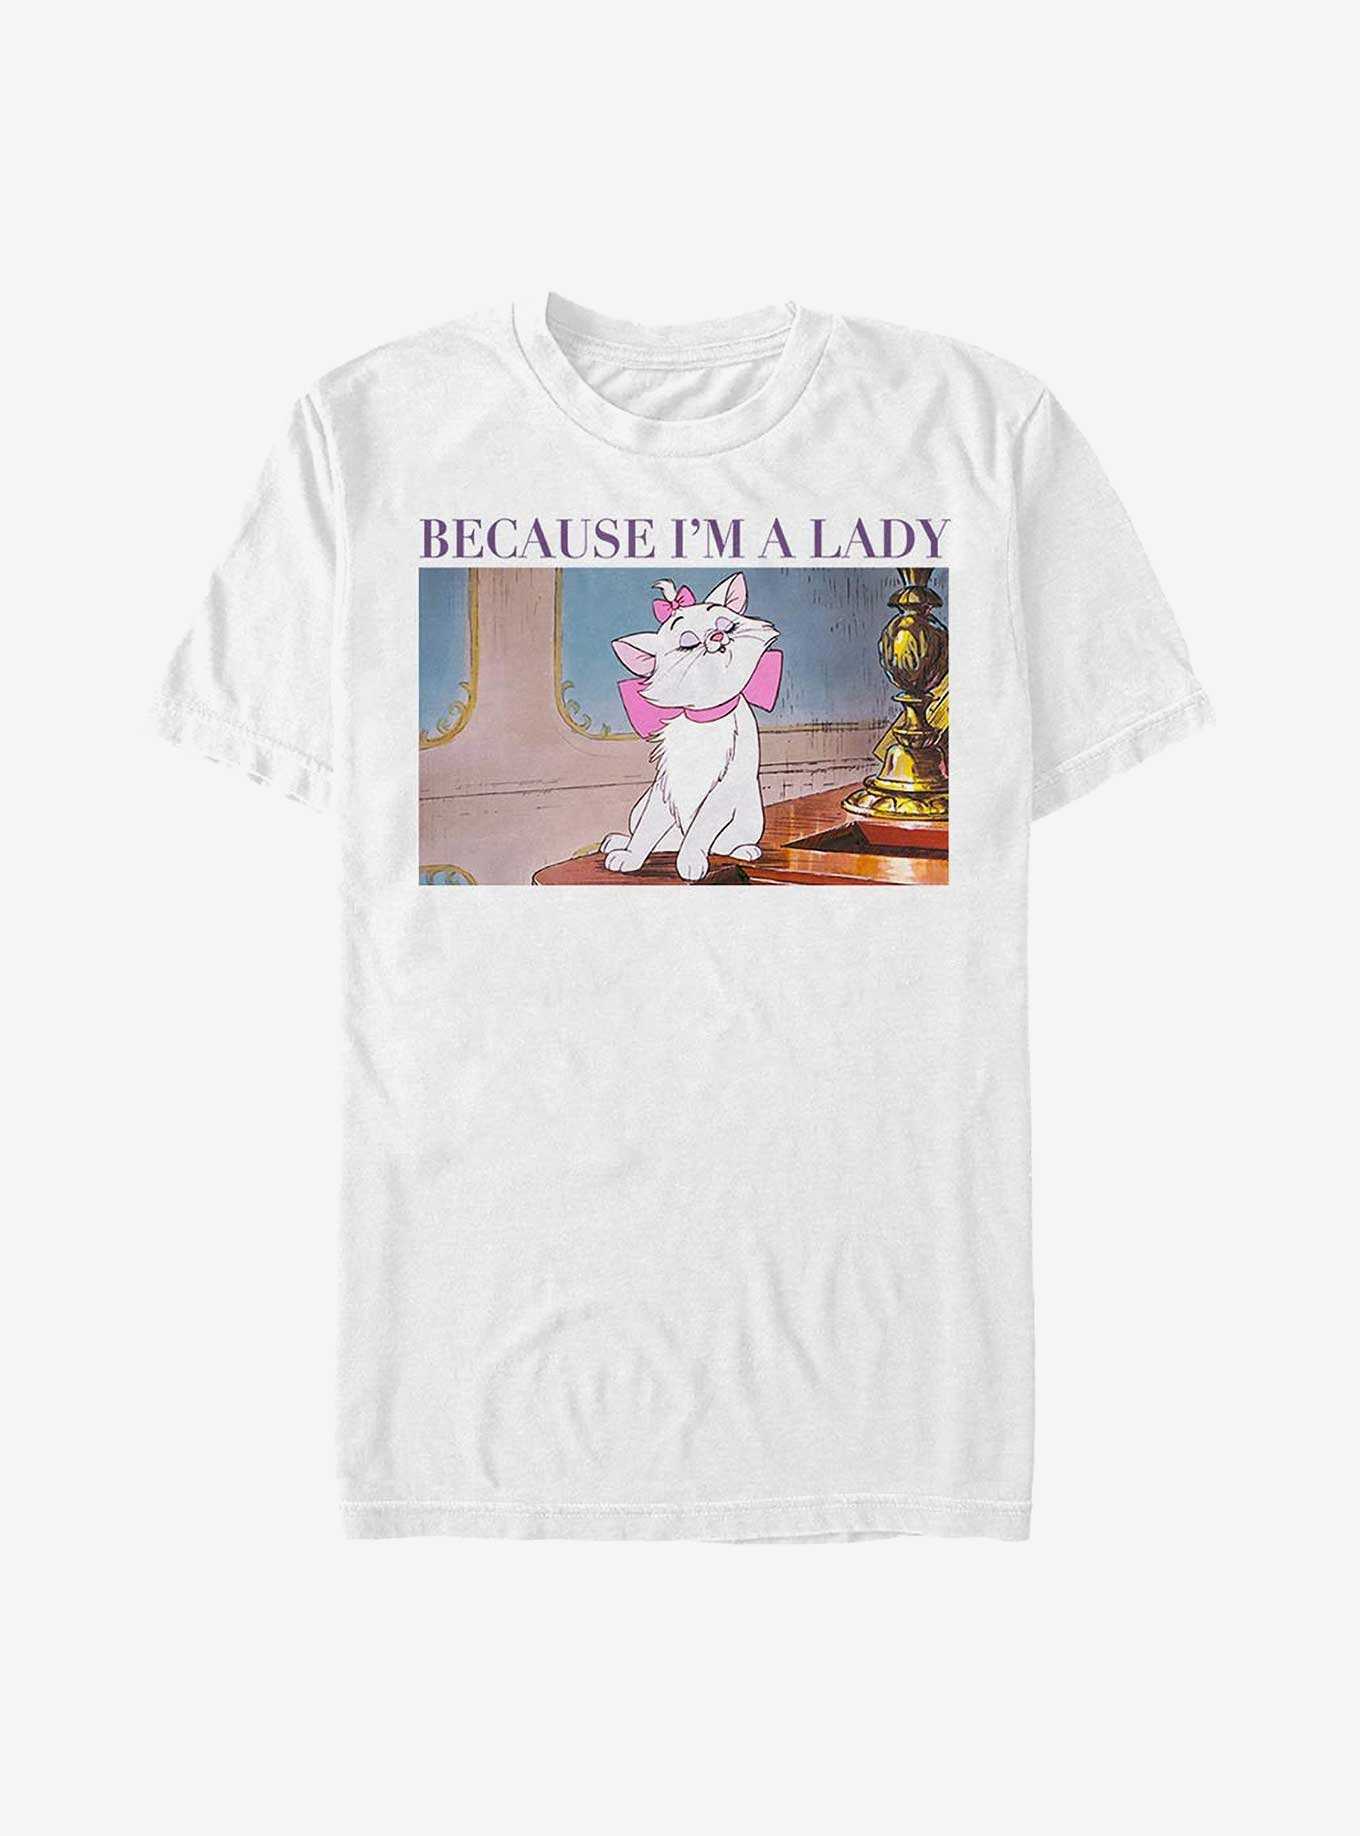 Shirts Plushies, Merch & Hot OFFICIAL Aristocats Topic |